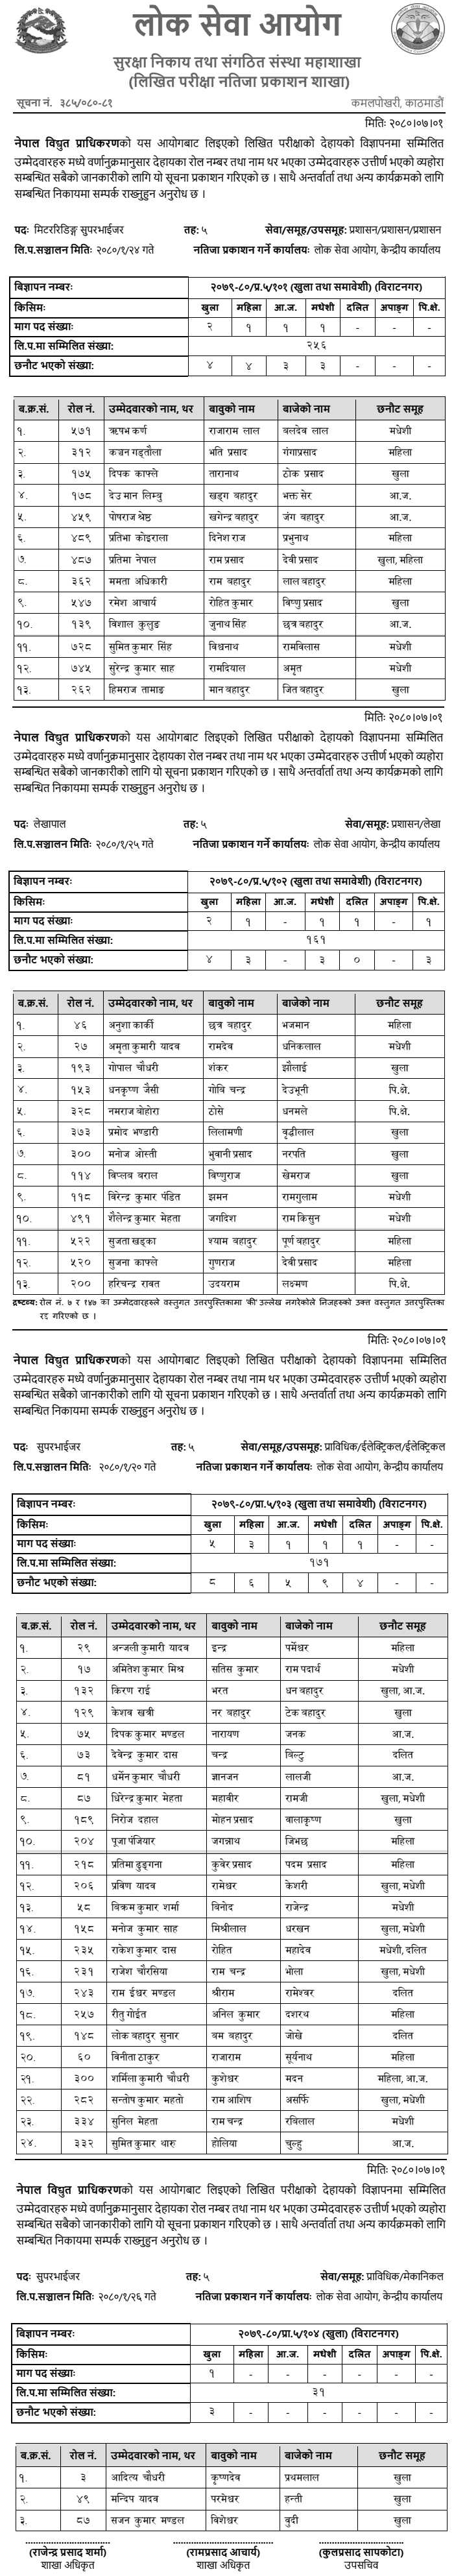 Nepal Electricity Authority NEA Written Exam Result 5th Level Various Posts